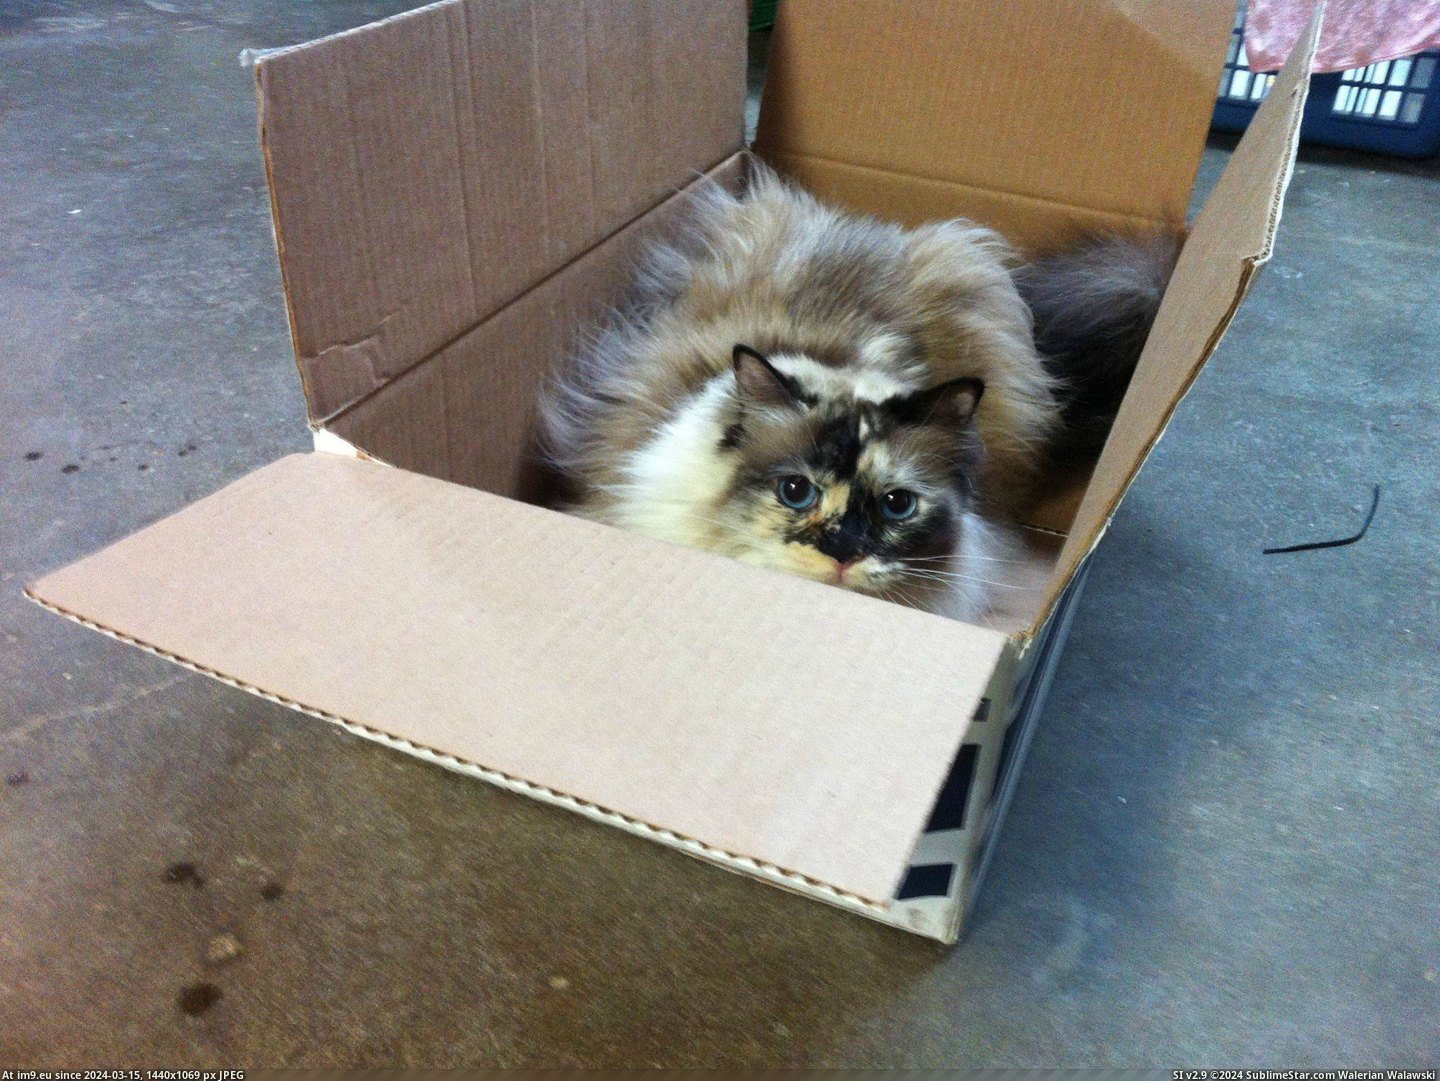 #Cat #Picture #Cakeday #Minutes #Gigi #Left #Trap [Aww] Oh no! Only 35 minutes left of my cakeday, here's a picture of Gigi in a cat trap! Pic. (Изображение из альбом My r/AWW favs))